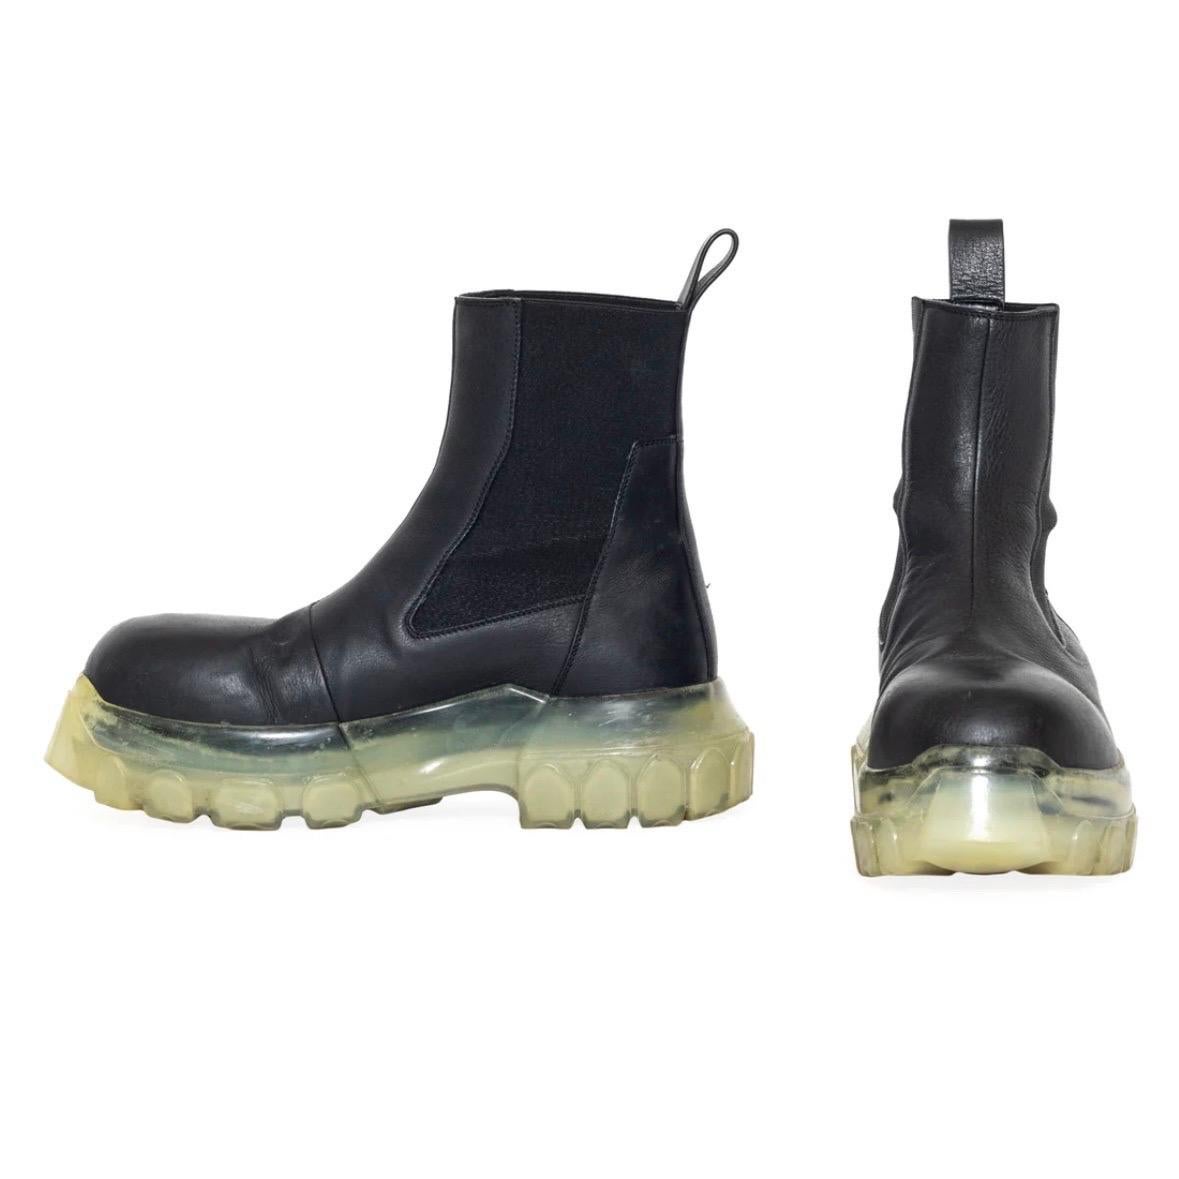 Rick Owens Black and Transparent Beatle Bozo Tractor Boots Size 38 (Spring 2021) In Good Condition For Sale In Los Angeles, CA